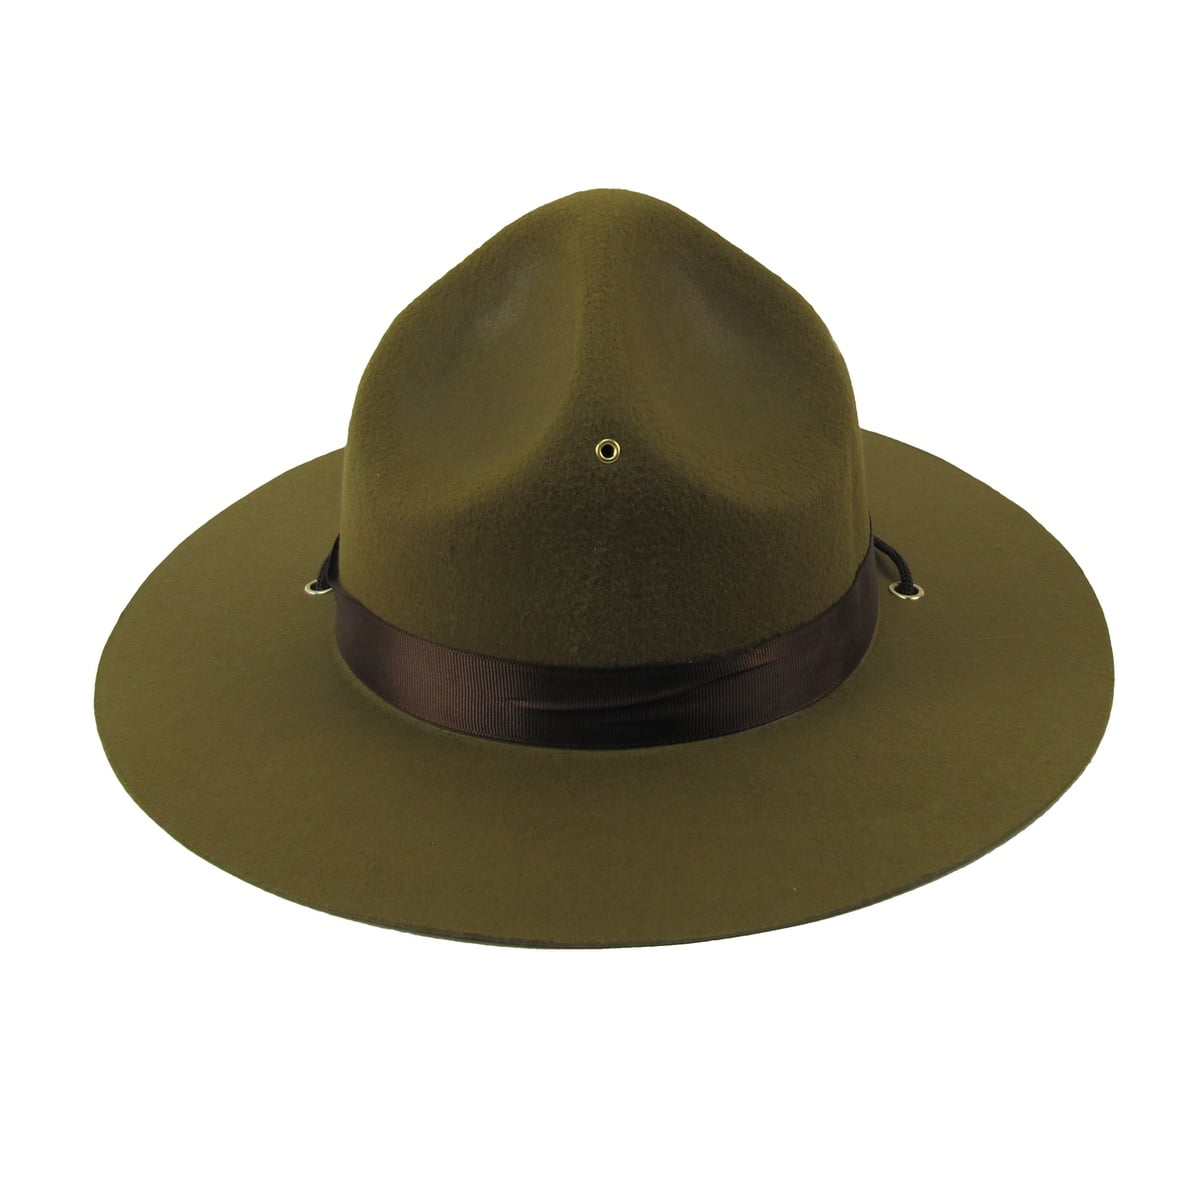 Olive Green Park Ranger Hat Outdoor Cap Adult Costume Accessory